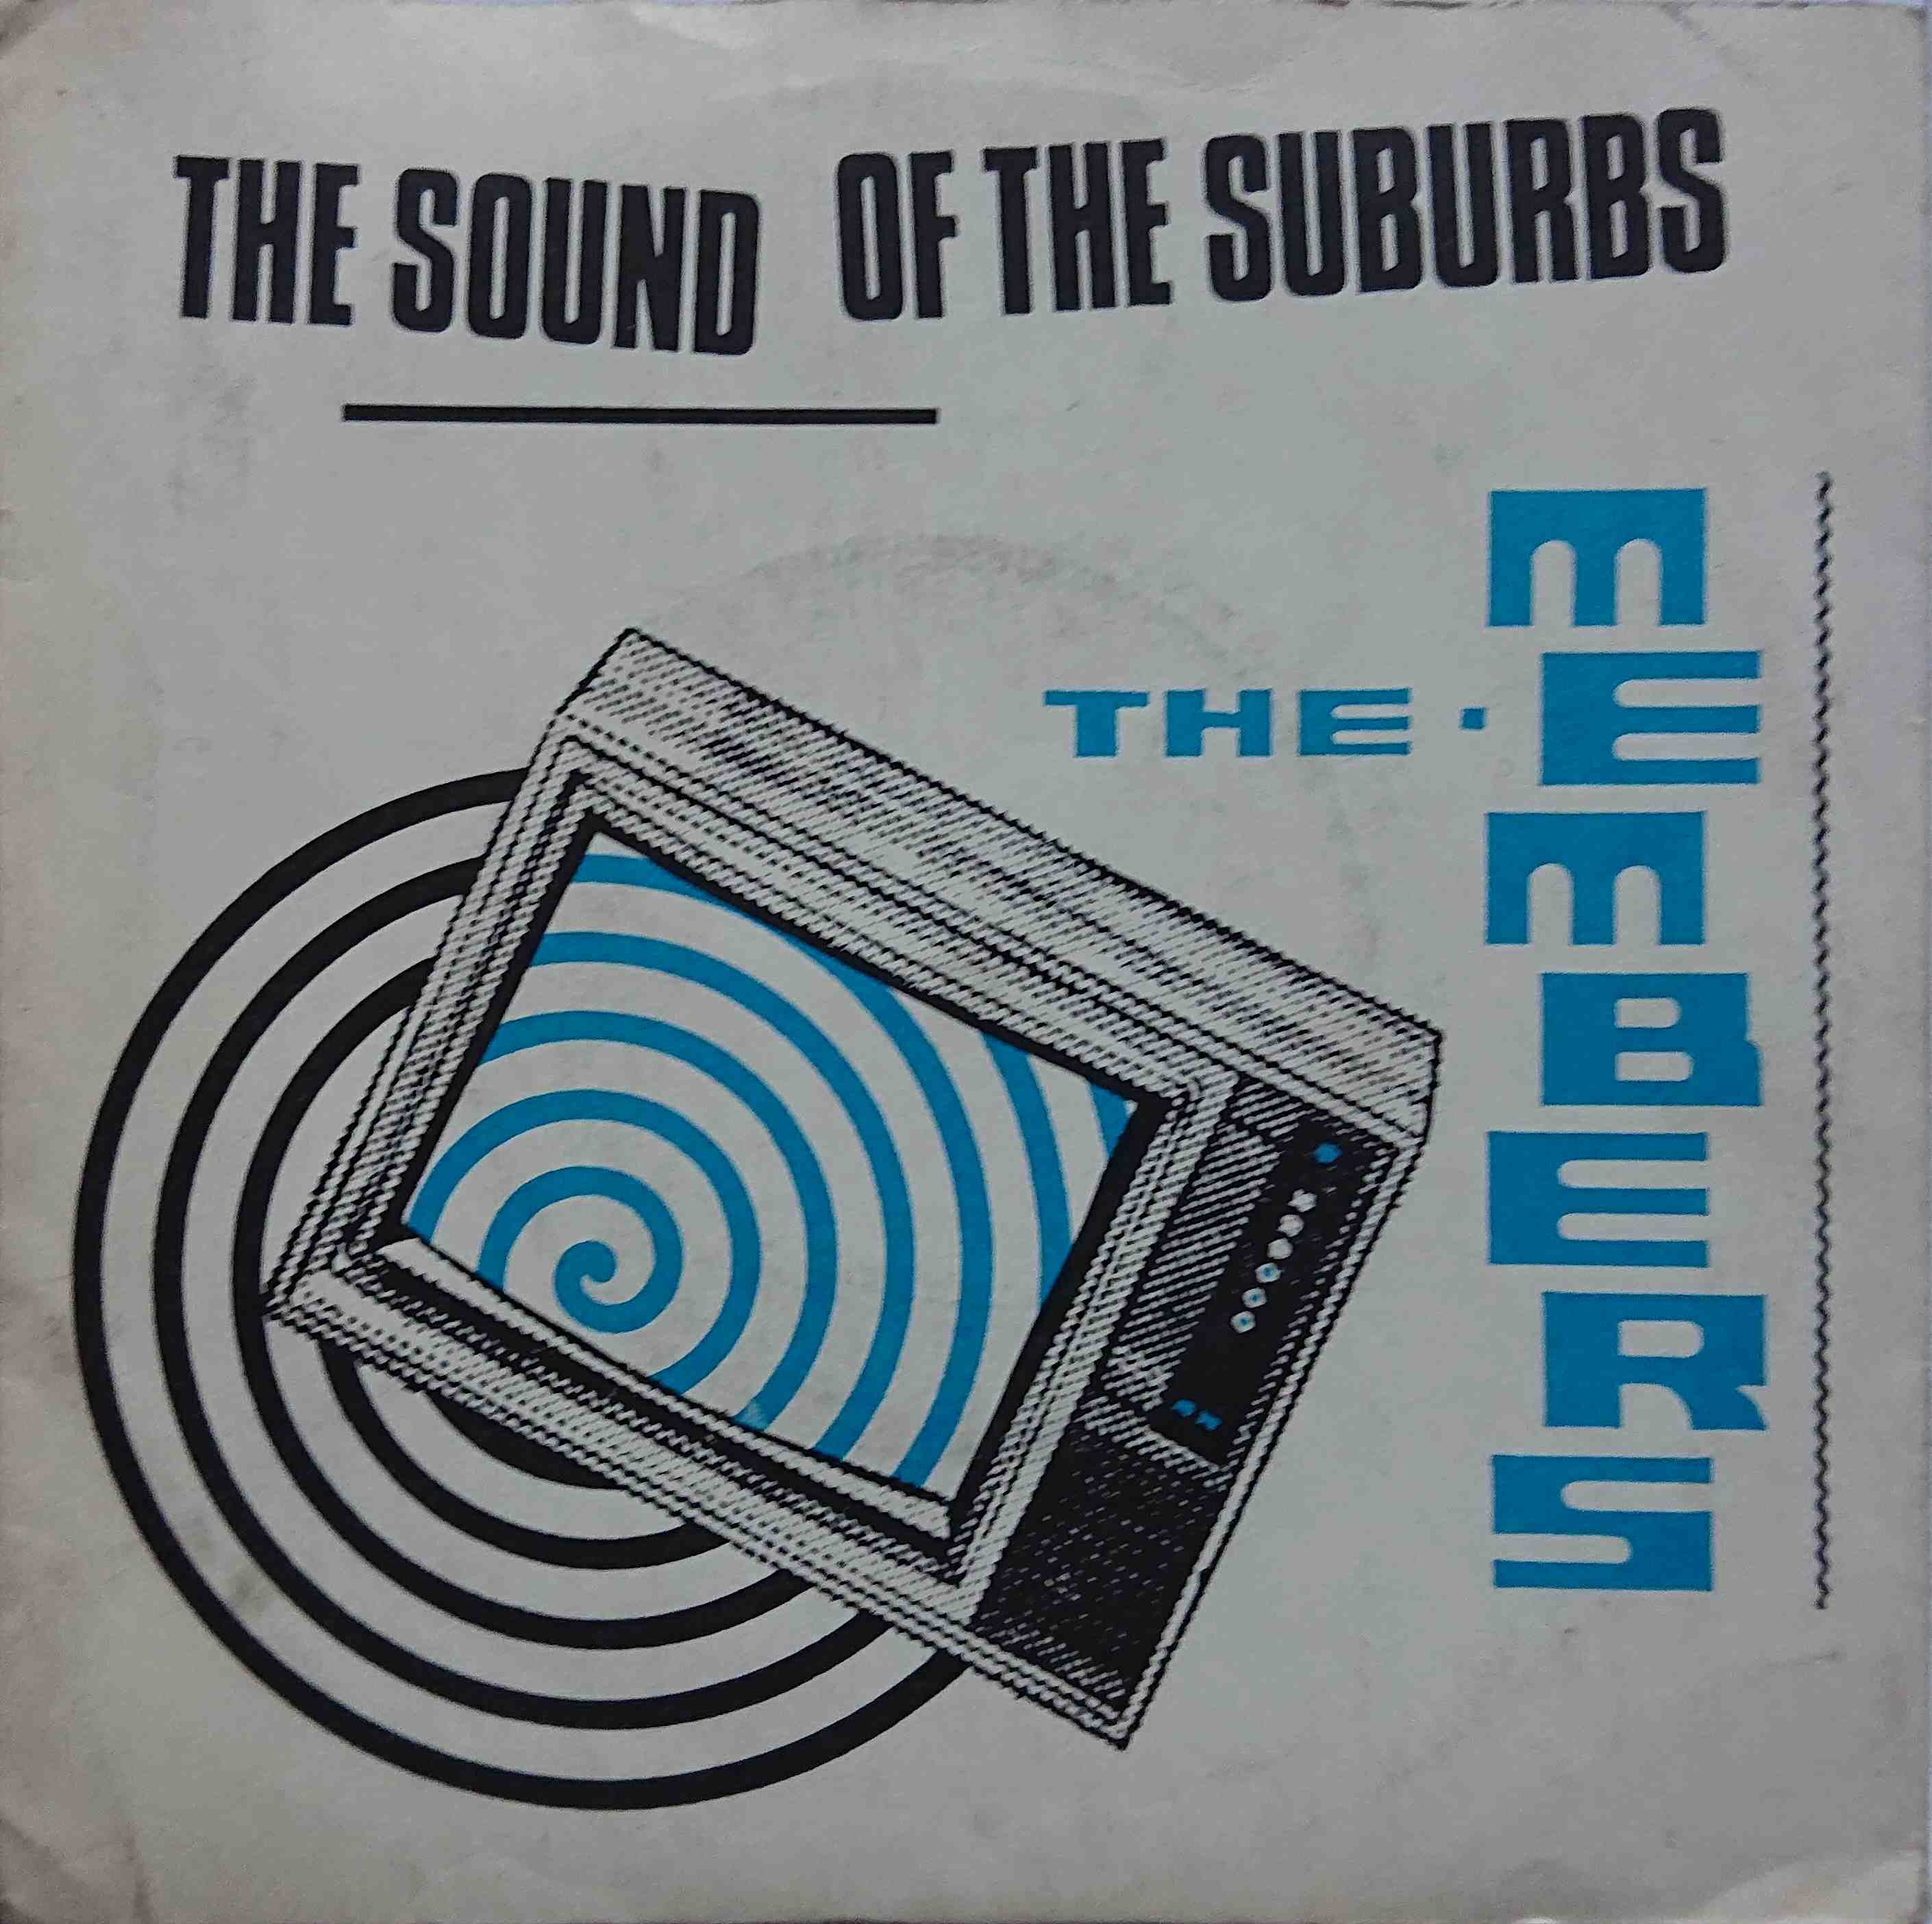 Picture of The sound of the suburbs by artist The Members 